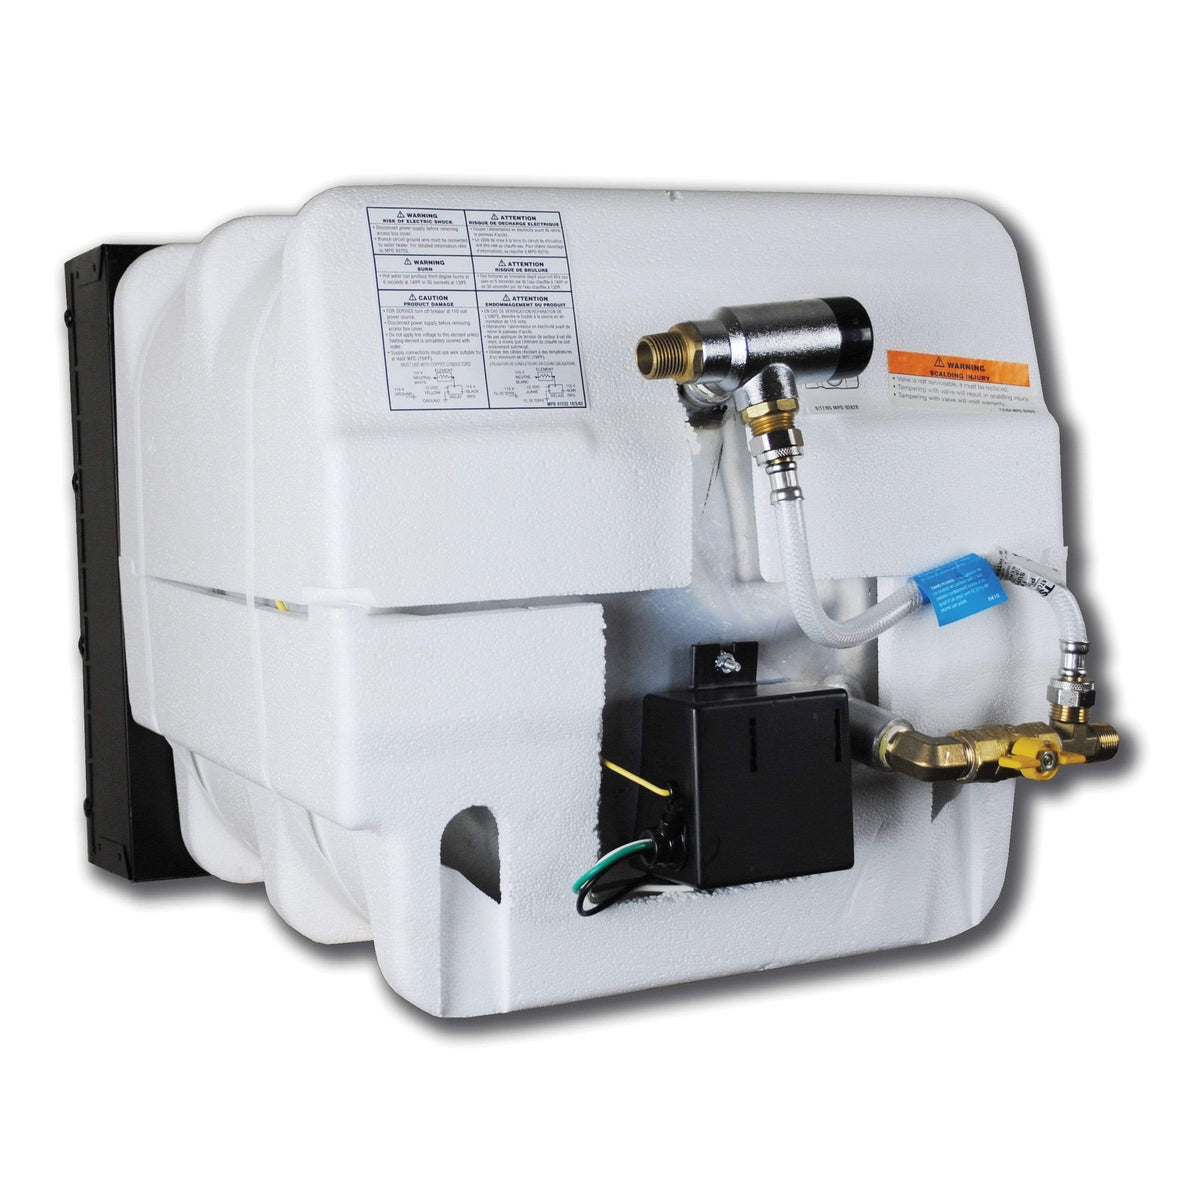 Atwood Mobile Products Not Qualified for Free Shipping Atwood XT Water Heater 10-Gallon LP #94105